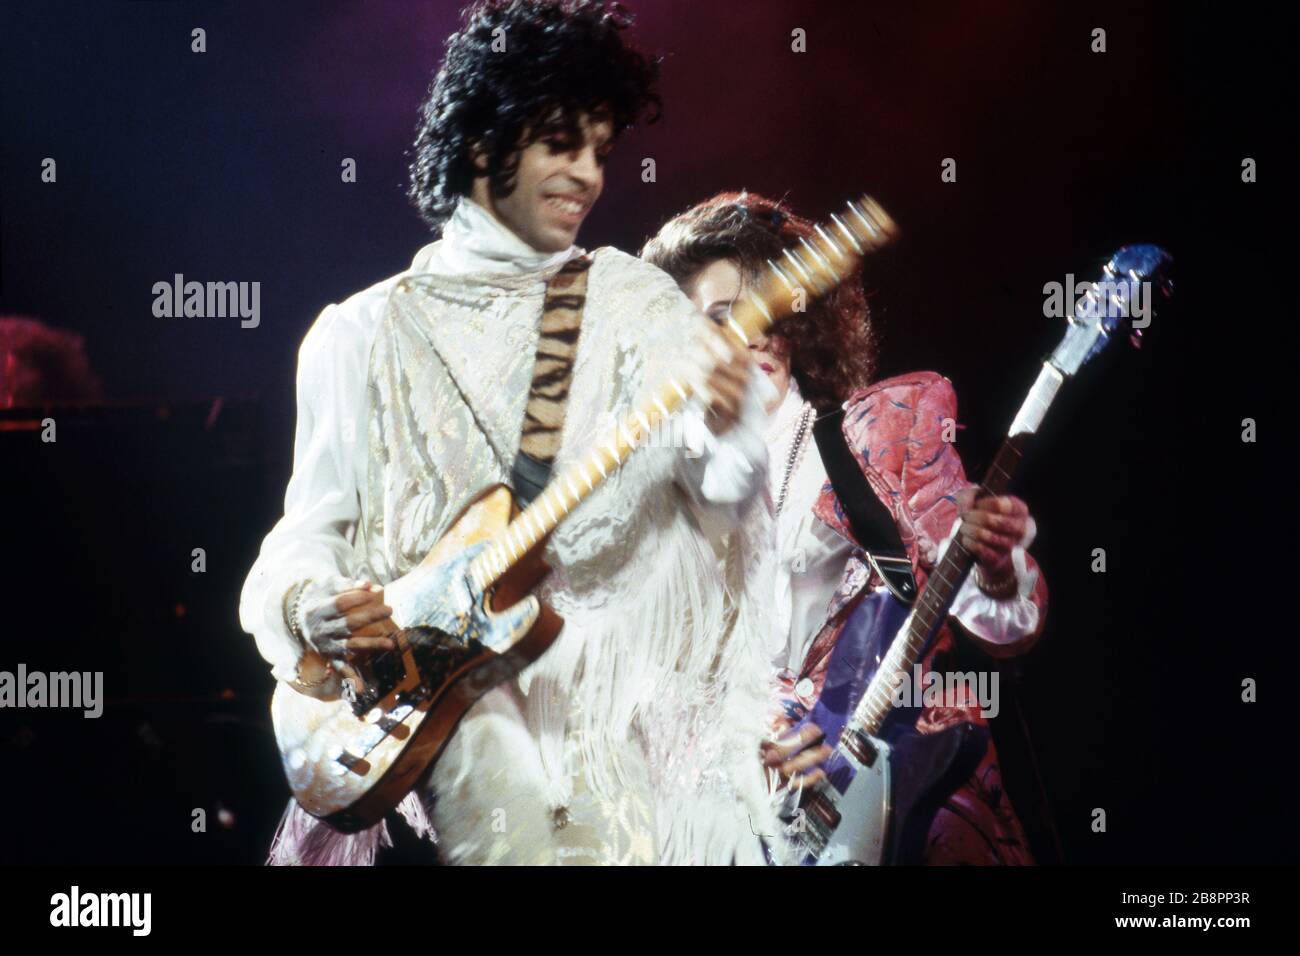 DETROIT, MI - NOVEMBER 4: American singer Prince (1958-2016) performs onstage during the 1984 Purple Rain Tour on November 4, 1984, at the Joe Louis Arena in Detroit, Michigan.  Credit: Ross Marino Archive / MediaPunch Stock Photo